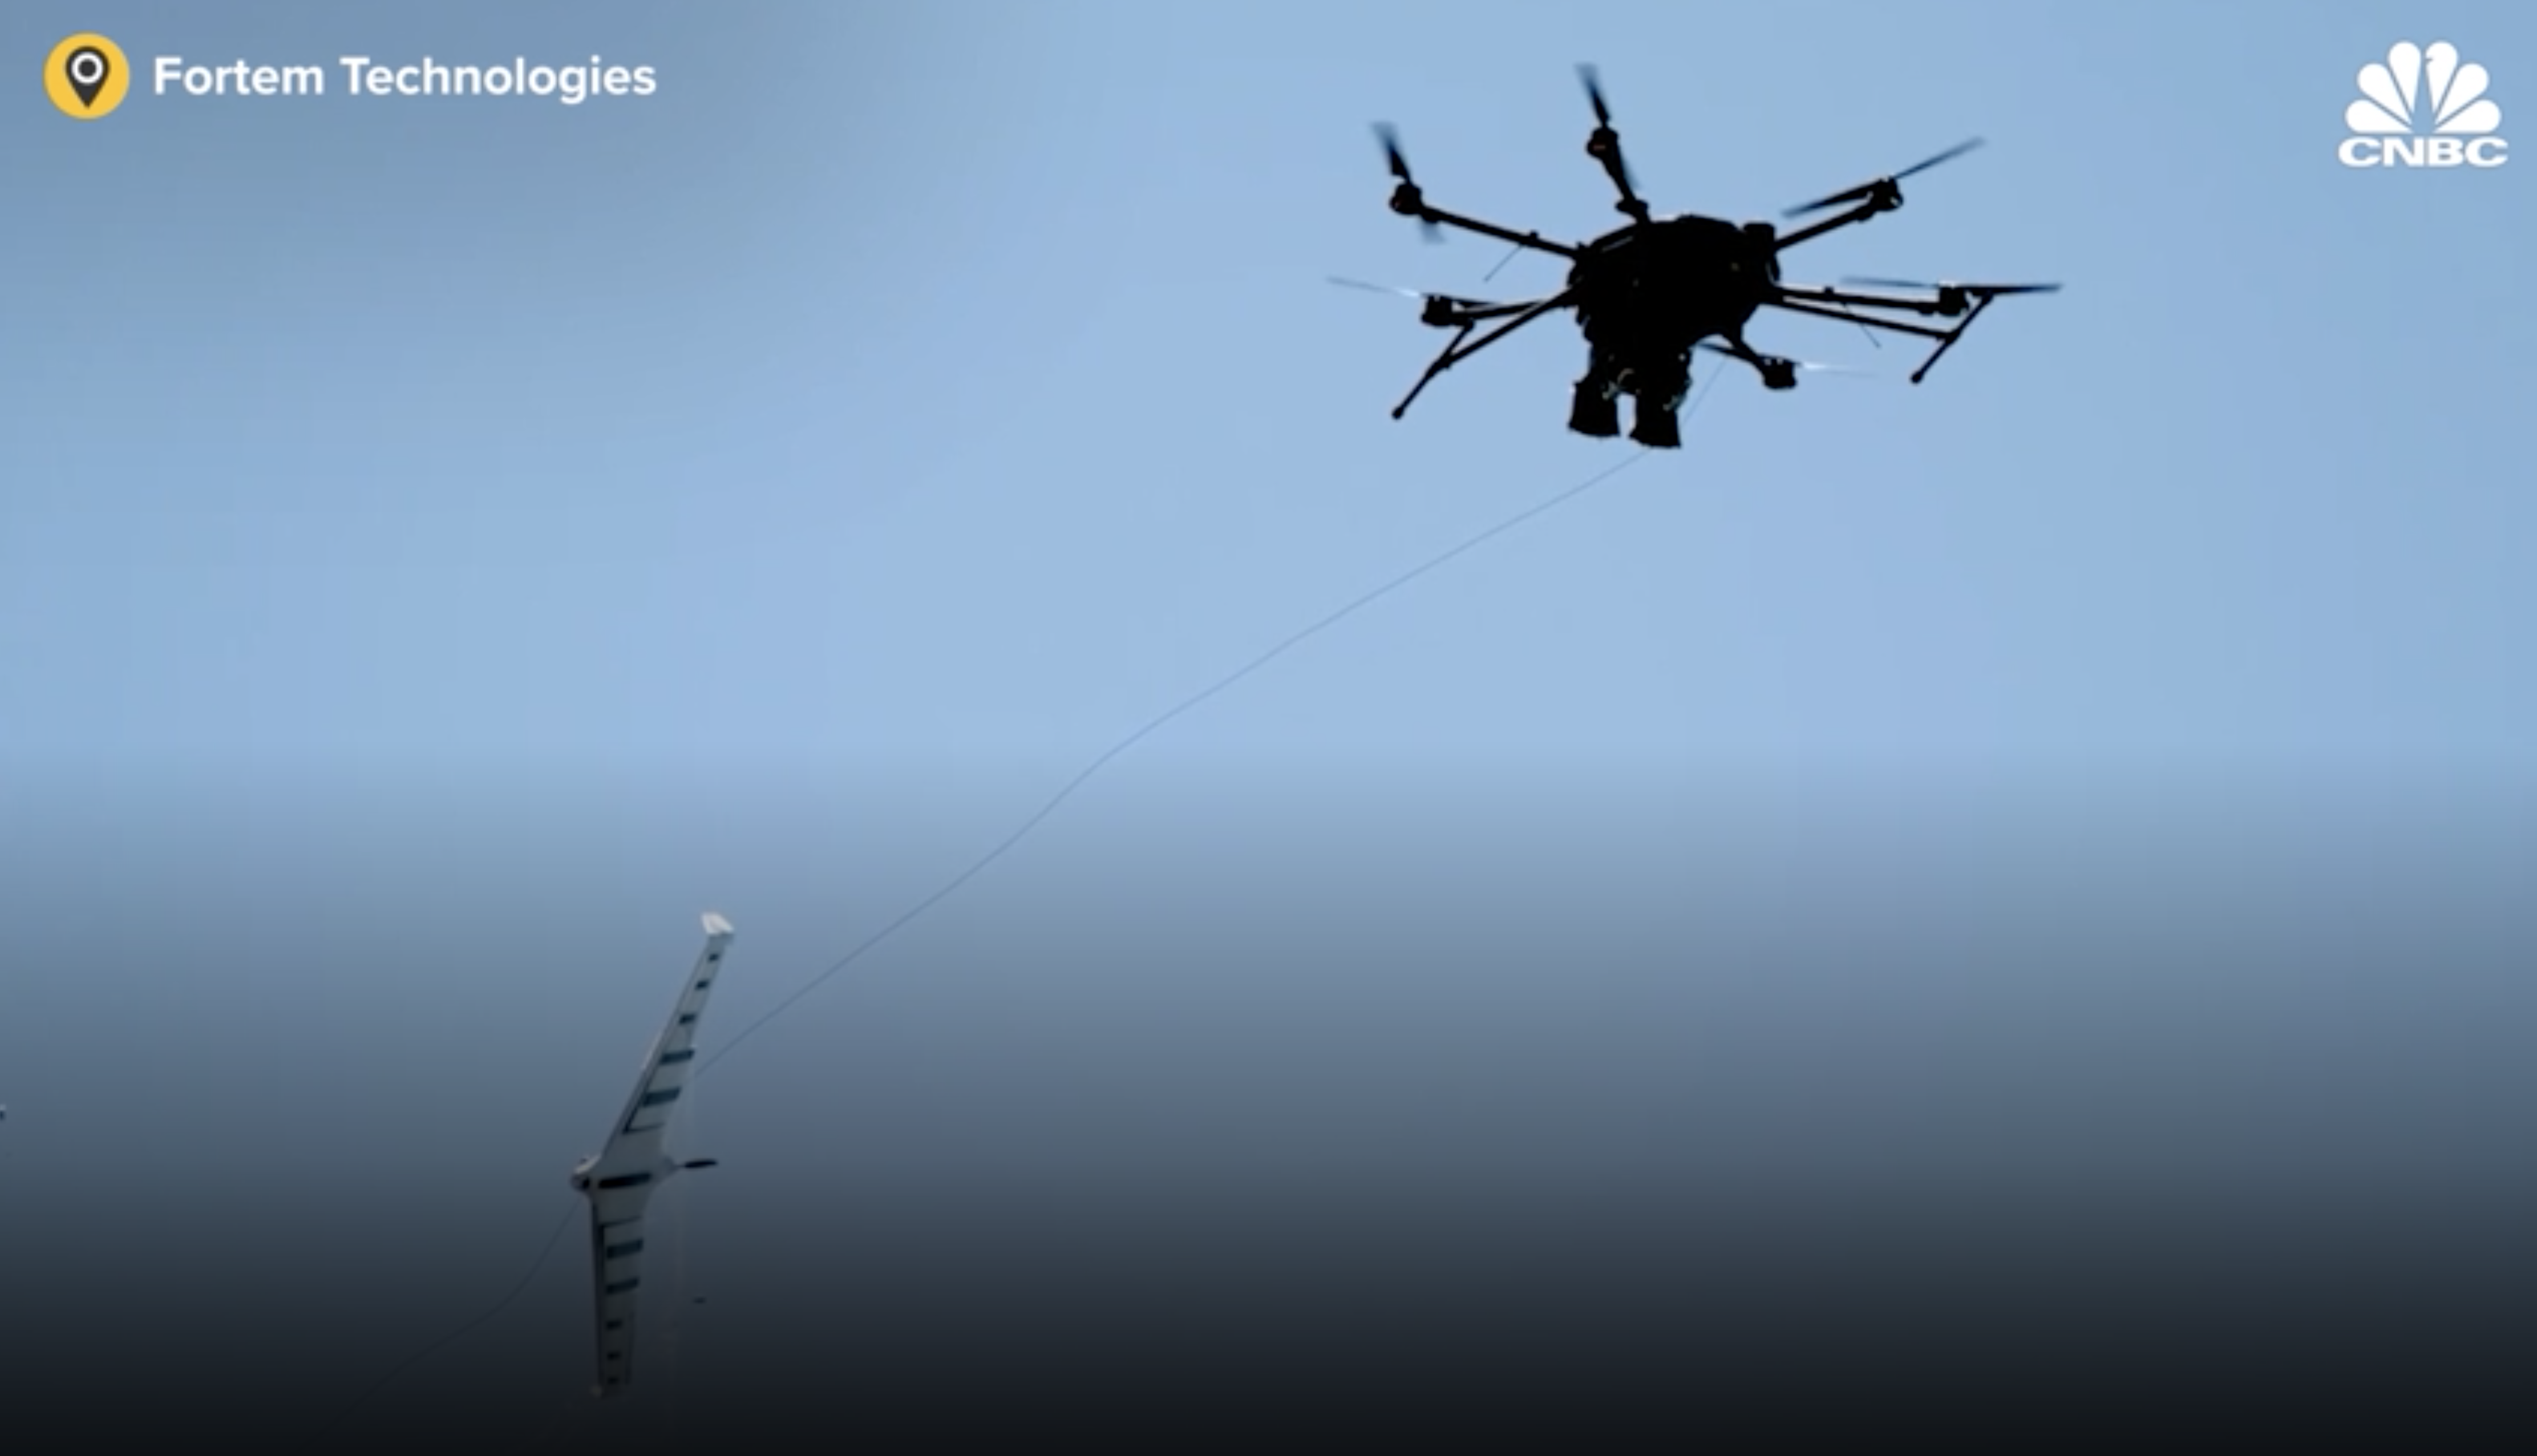 Can the U.S. compete with Chinese drones?